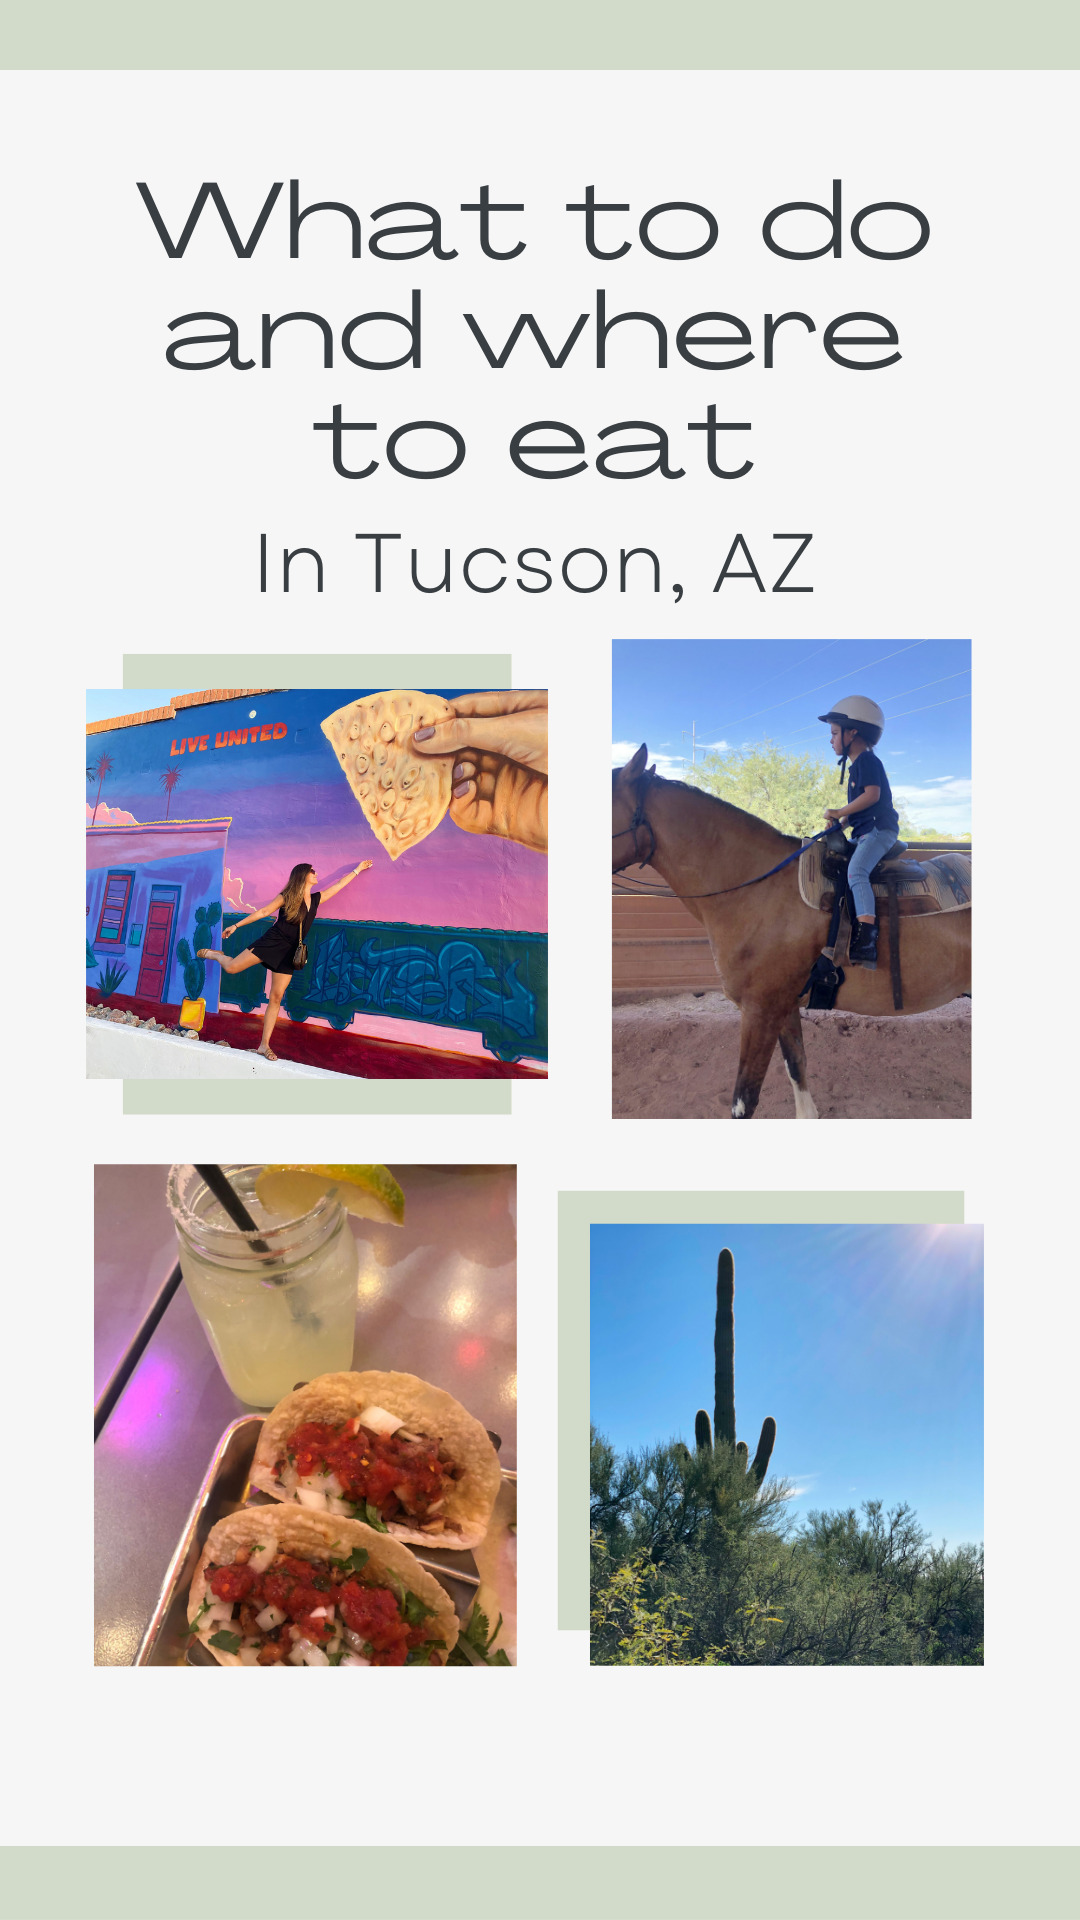 What to do and where to eat in Tucson